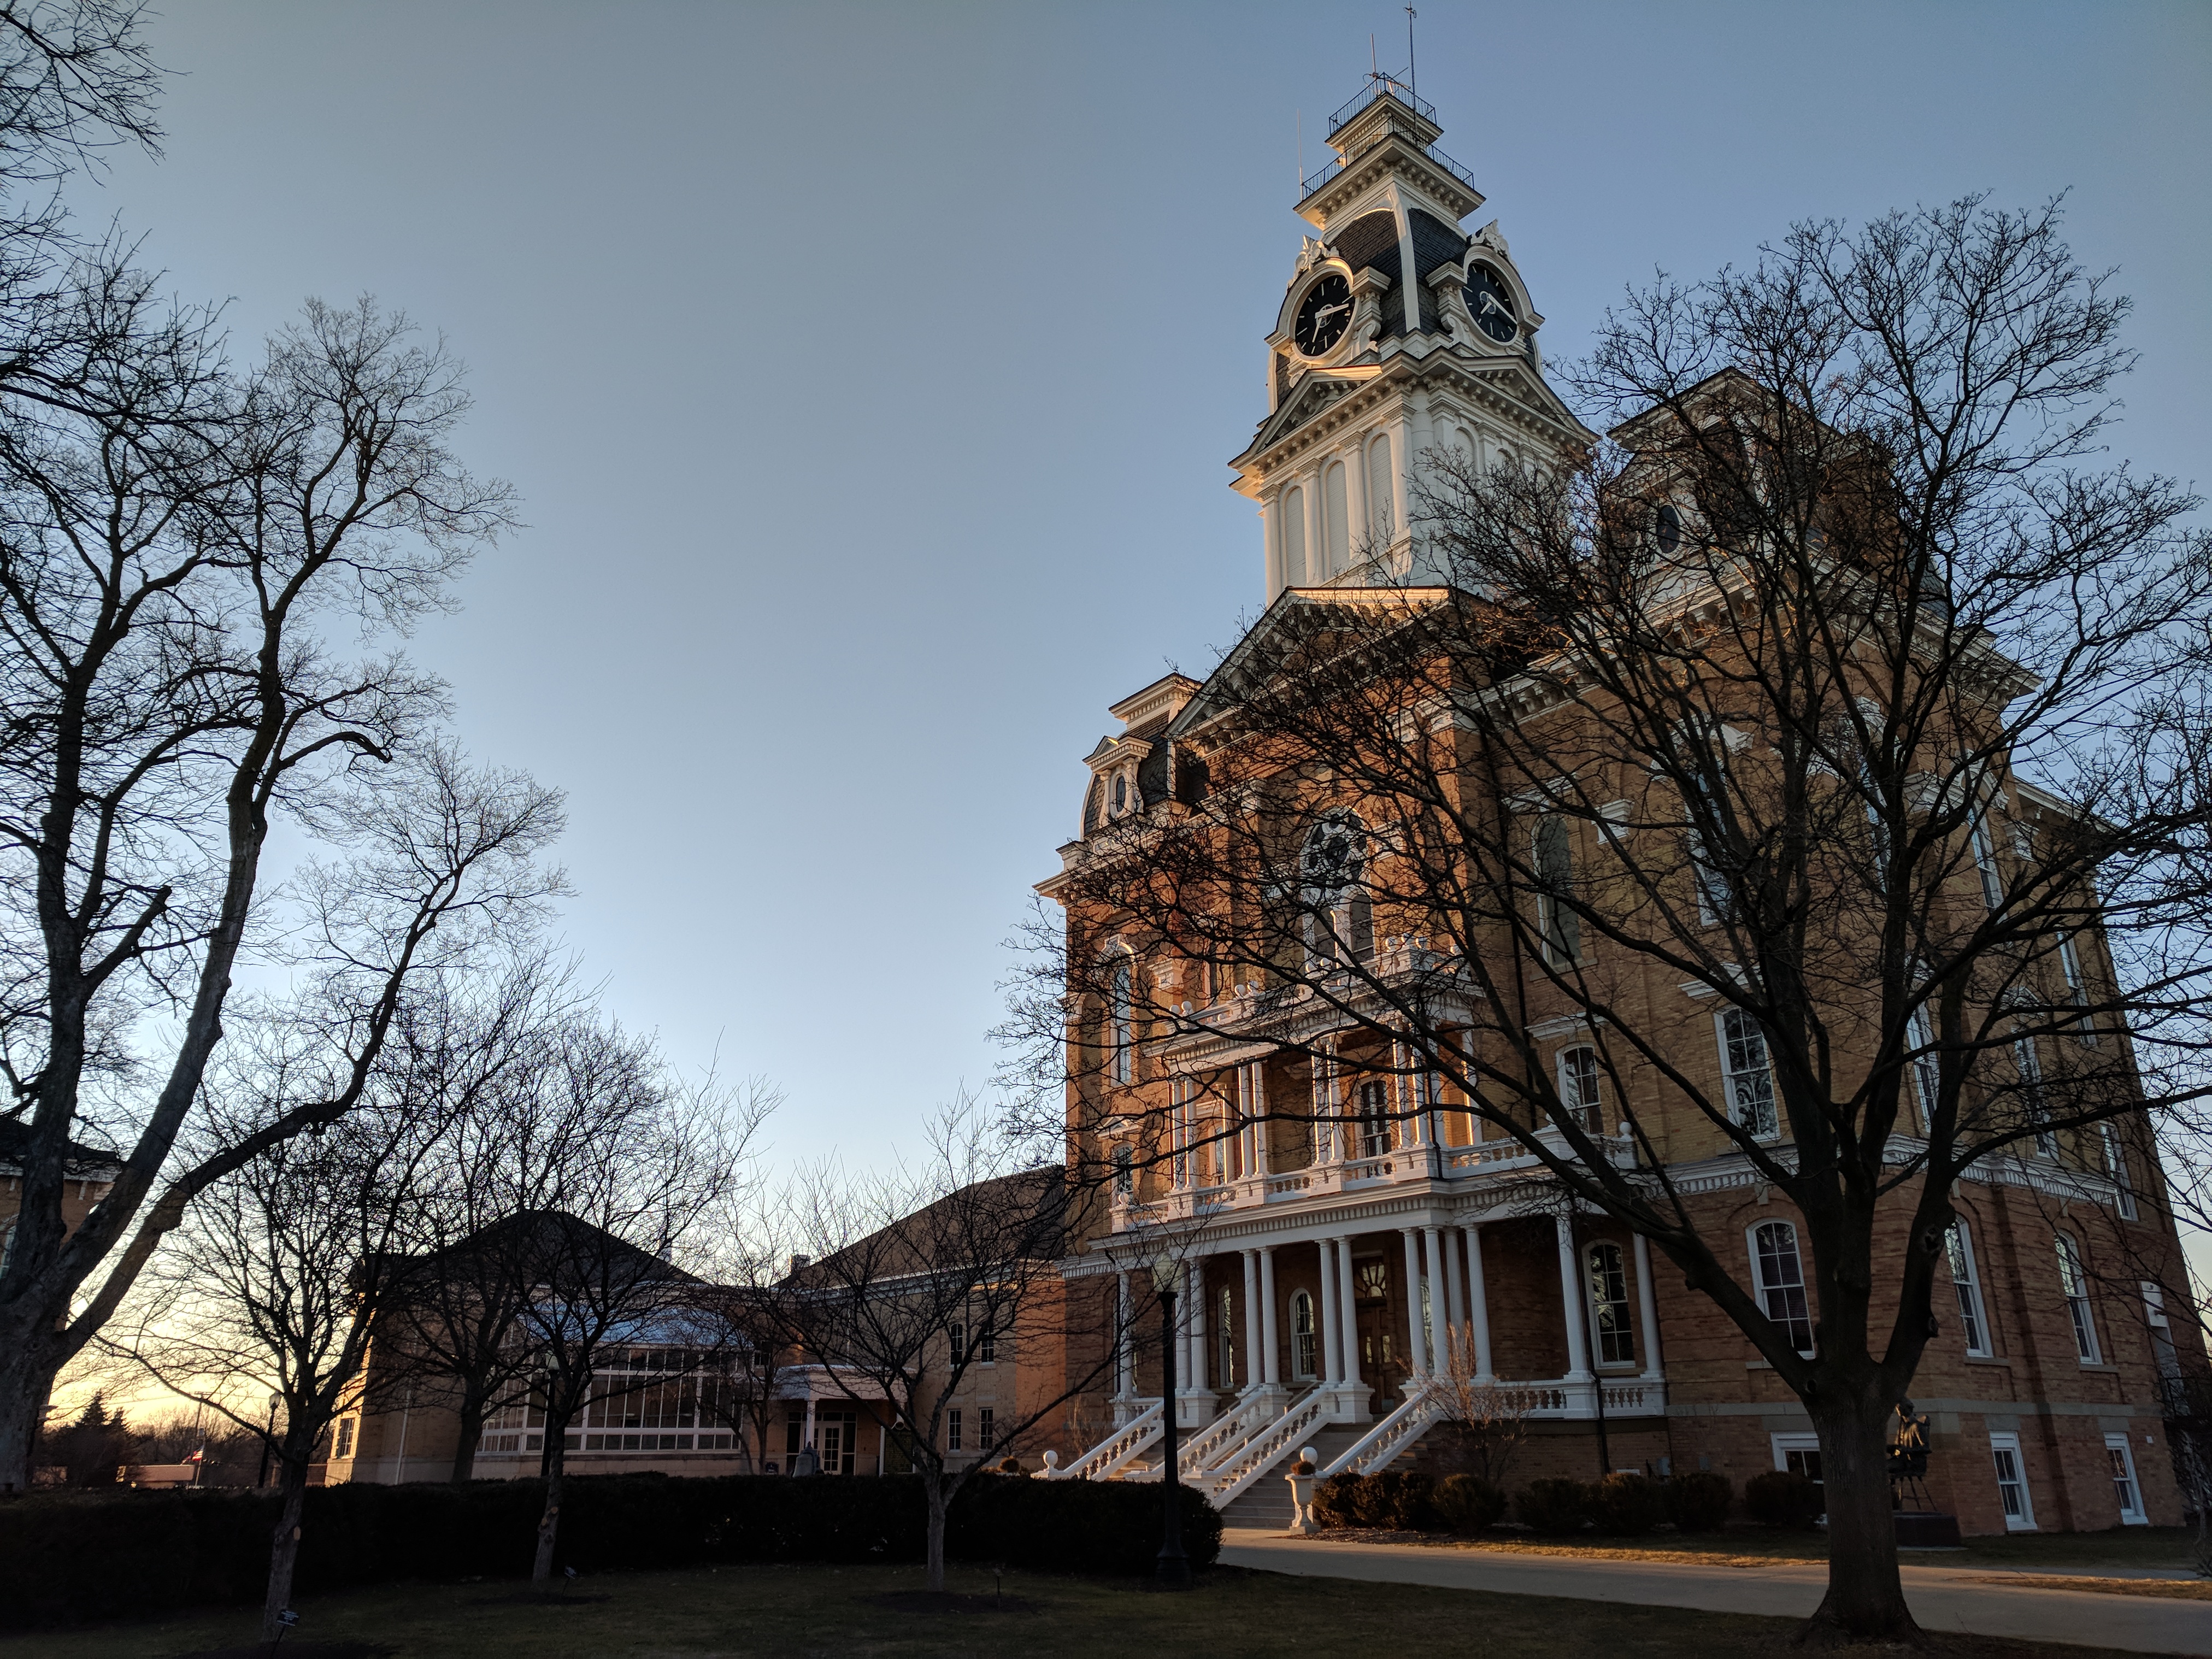 Place makes purpose of Hillsdale College full: Physical location connects spiritual and physical worlds